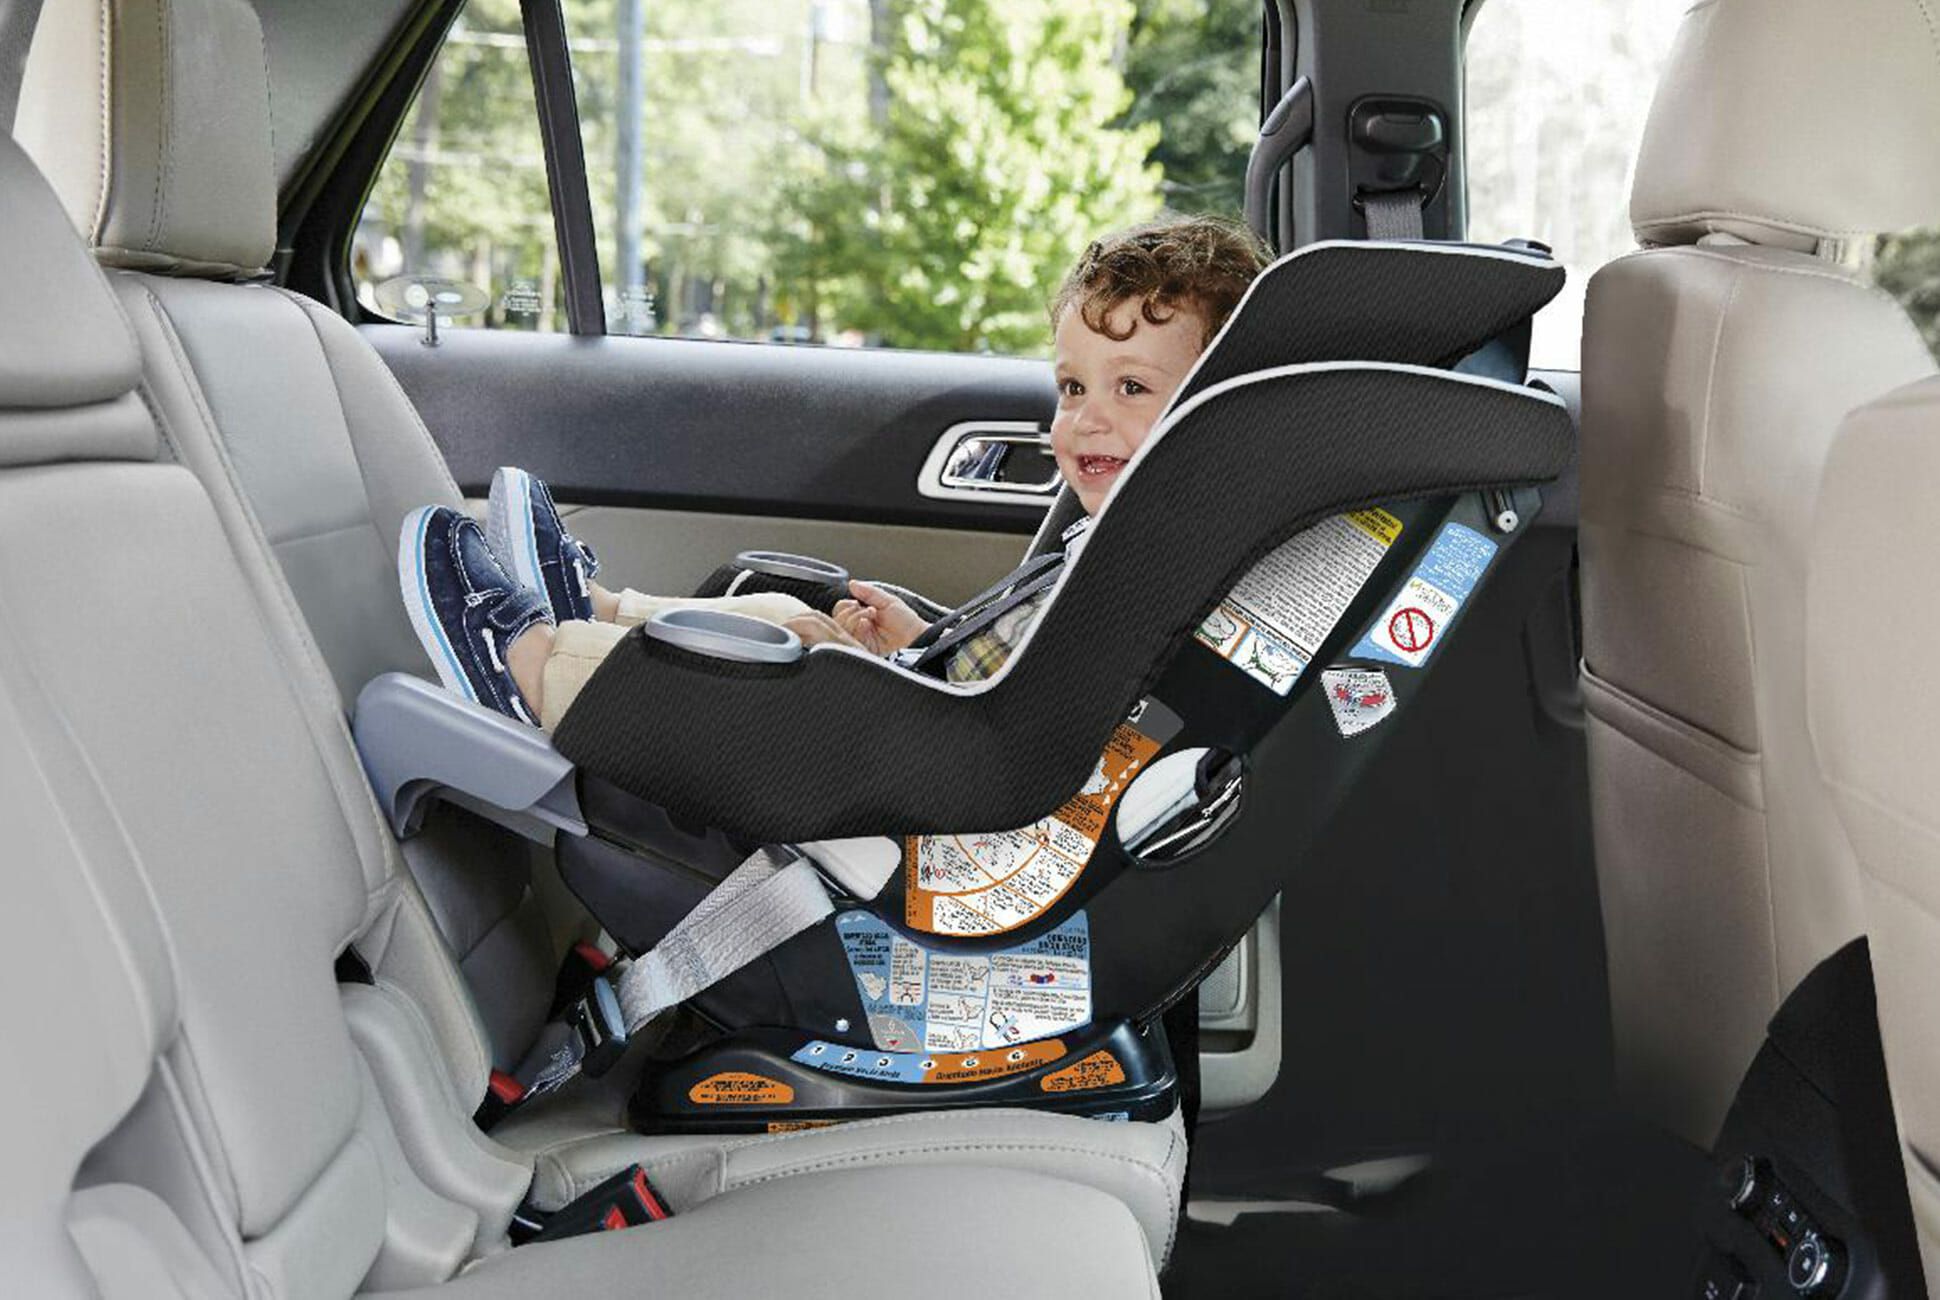 https://hips.hearstapps.com/amv-prod-gp.s3.amazonaws.com/gearpatrol/wp-content/uploads/2019/10/A-Quick-and-Easy-Guide-To-Buying-a-Child-Car-Seat-gear-patrol-lead-full.jpg